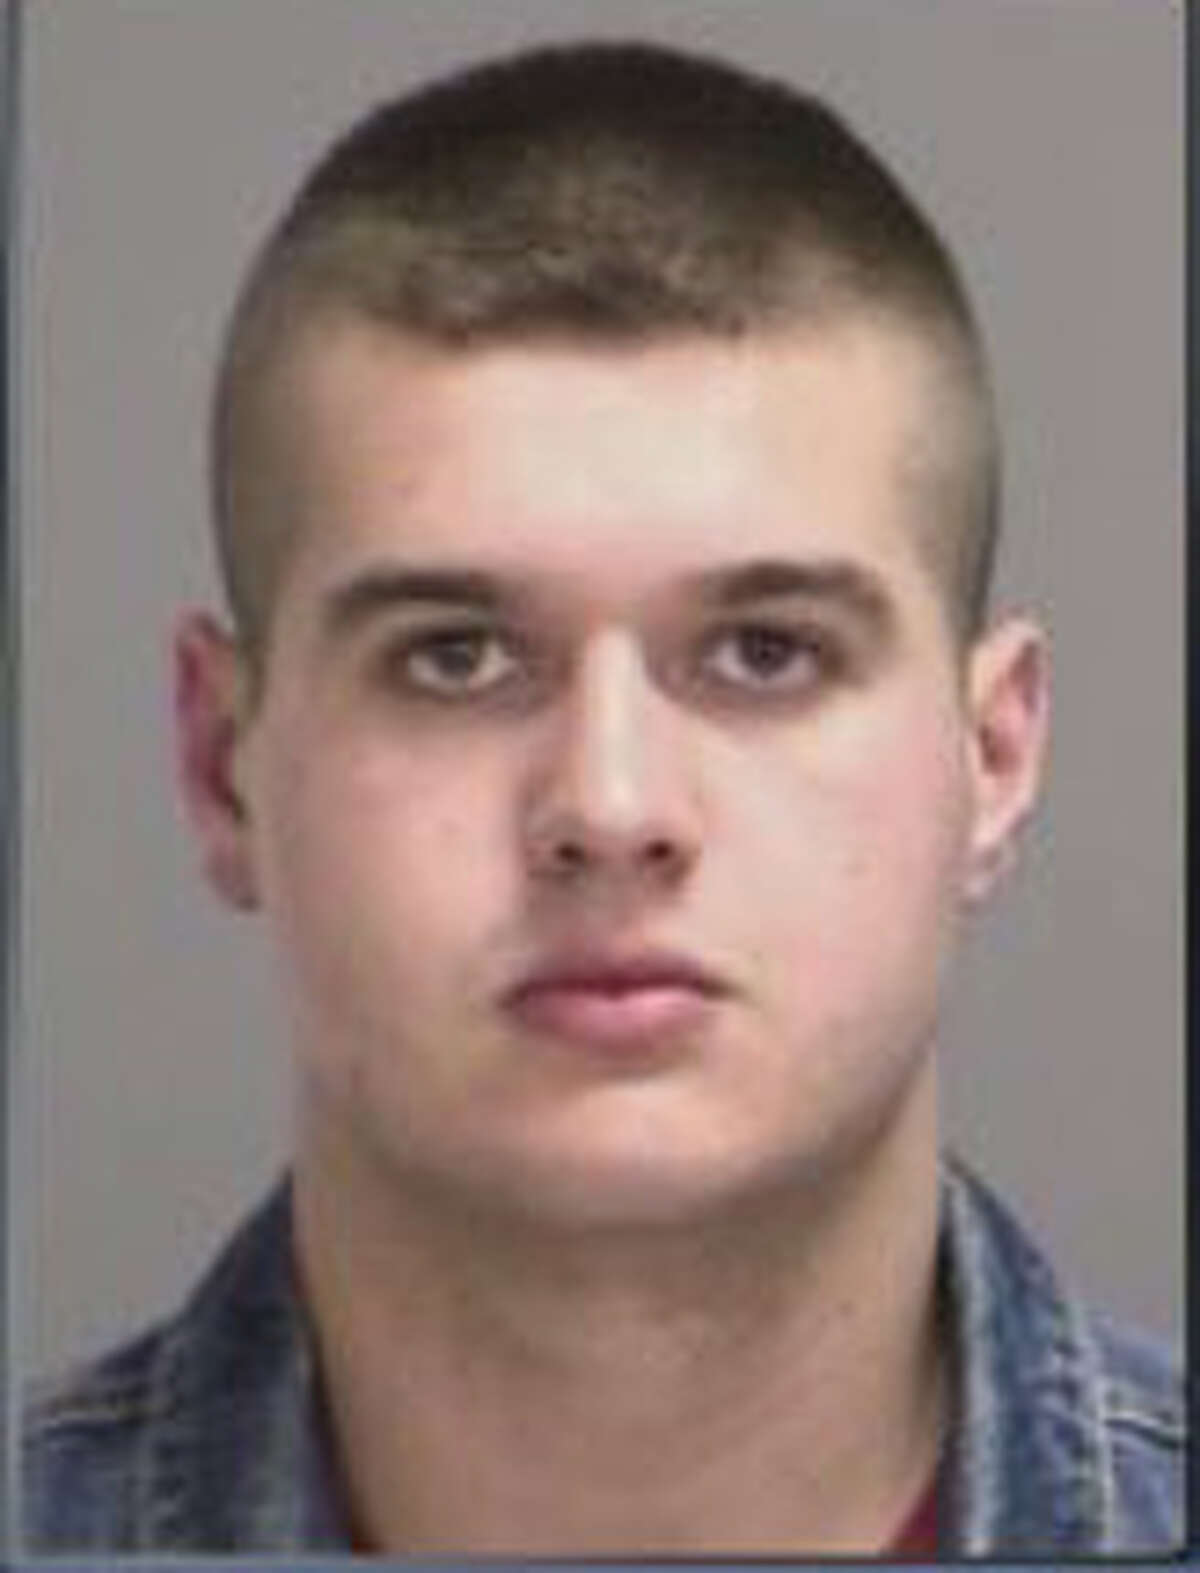 Garrett Kale, 18, was charged with illegally dumping a dog on Texas A&M University's campus in a "ritualistic" manner.